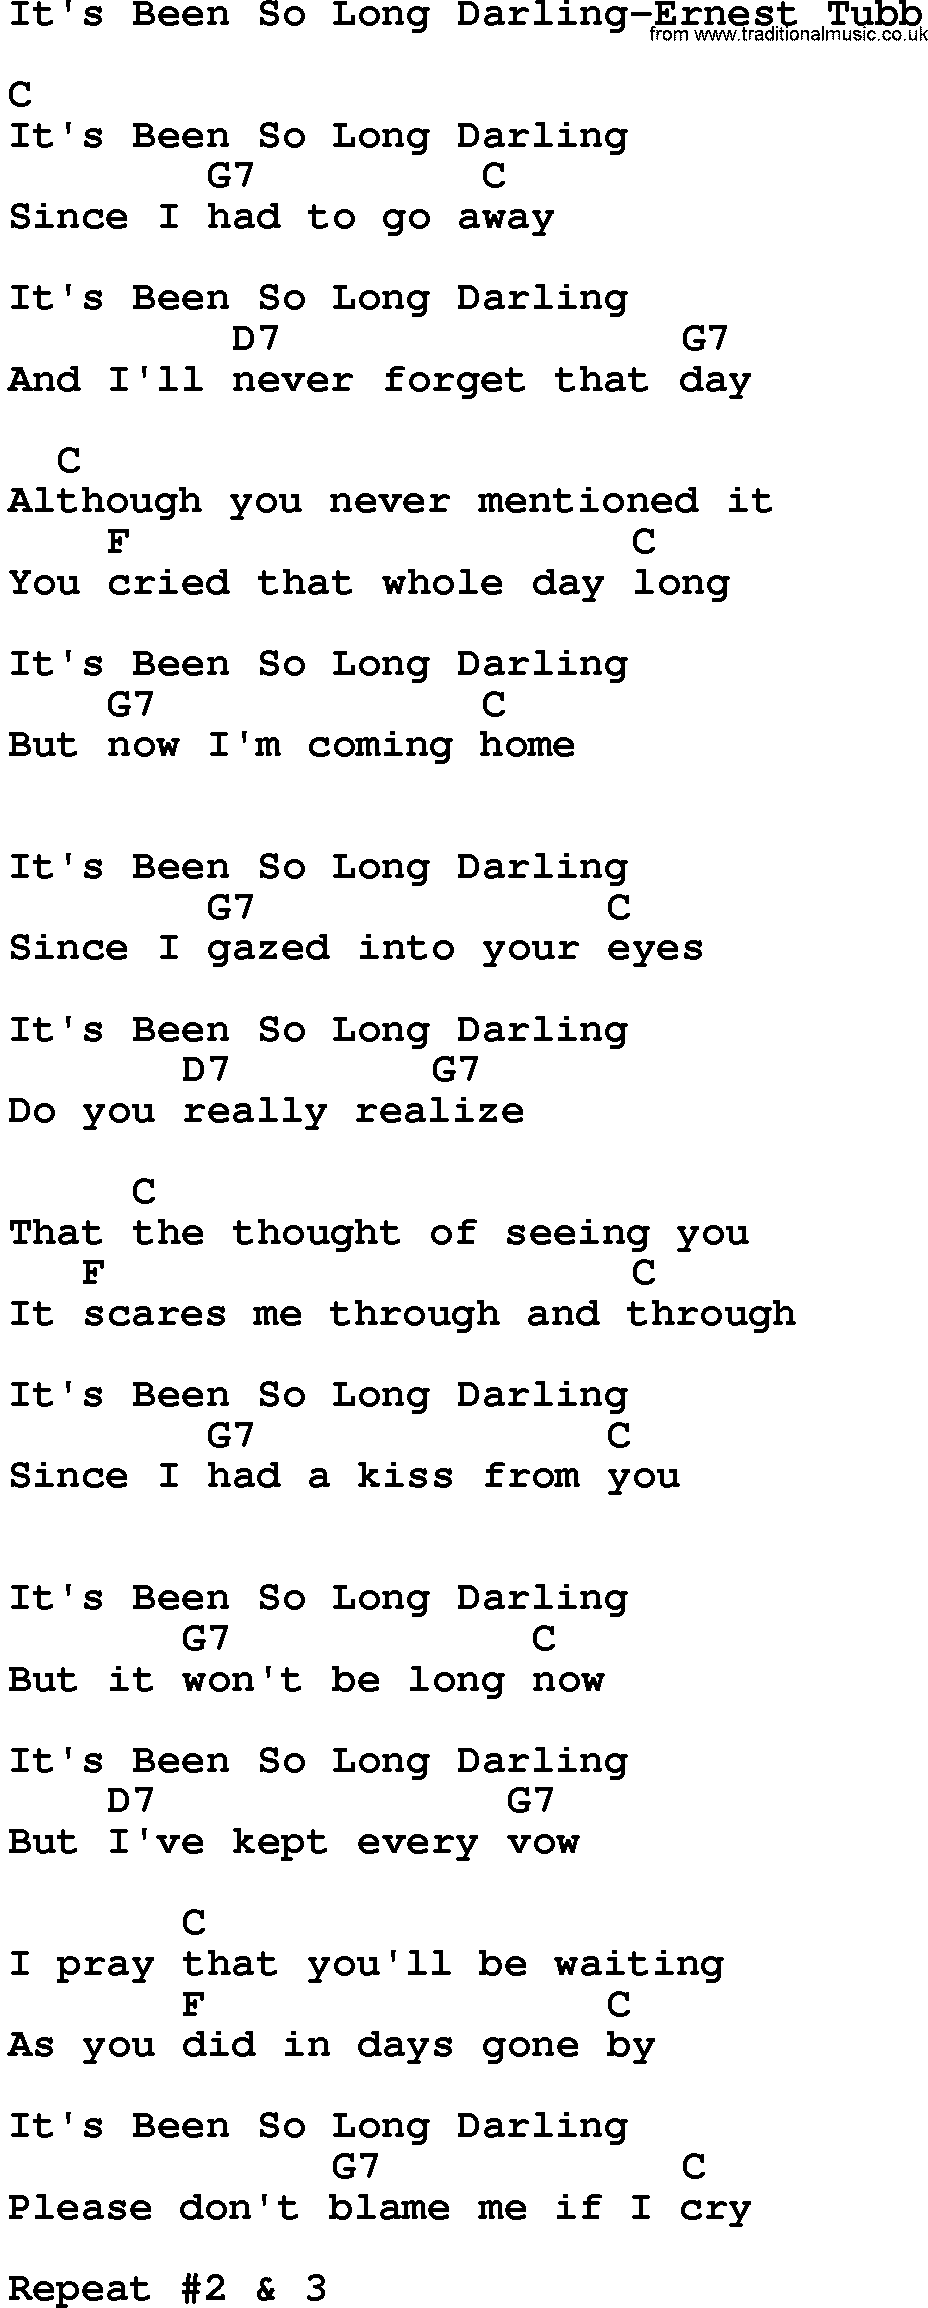 Country music song: It's Been So Long Darling-Ernest Tubb lyrics and chords